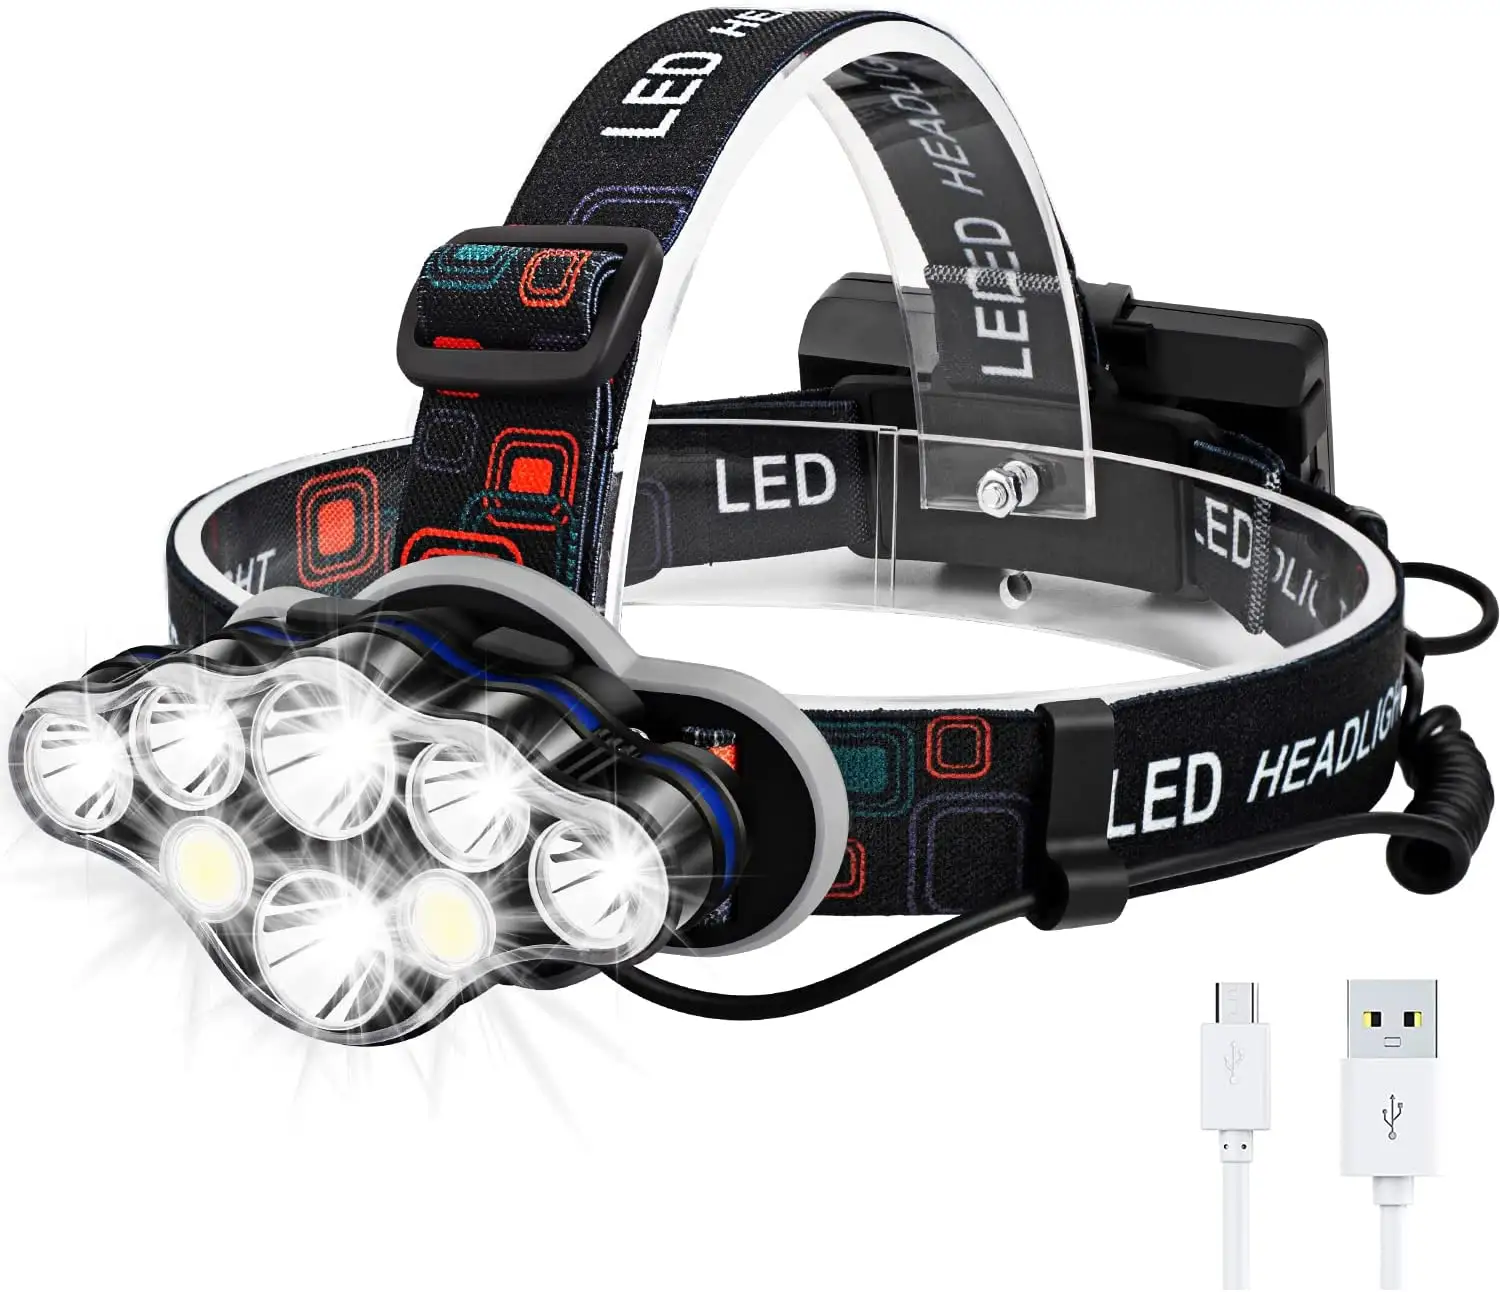 Portable LED Head Lamp Outdoor Flashlight Headlamps Adjustable Headband for Adults Kids Hiking Camping Fishing Gear Essentials